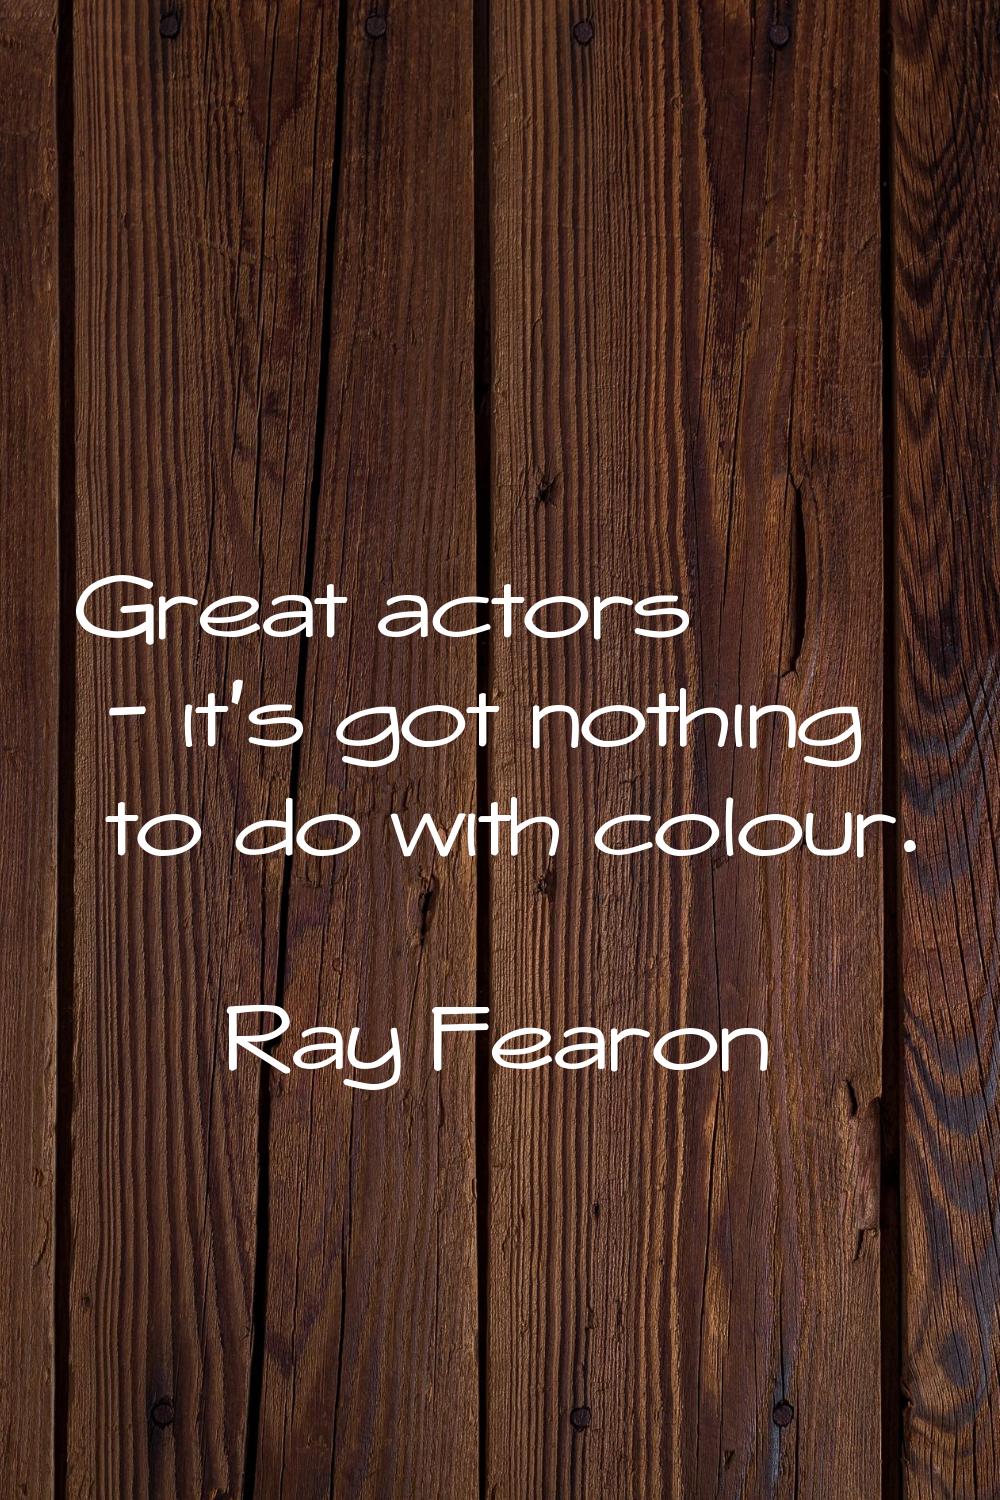 Great actors - it's got nothing to do with colour.